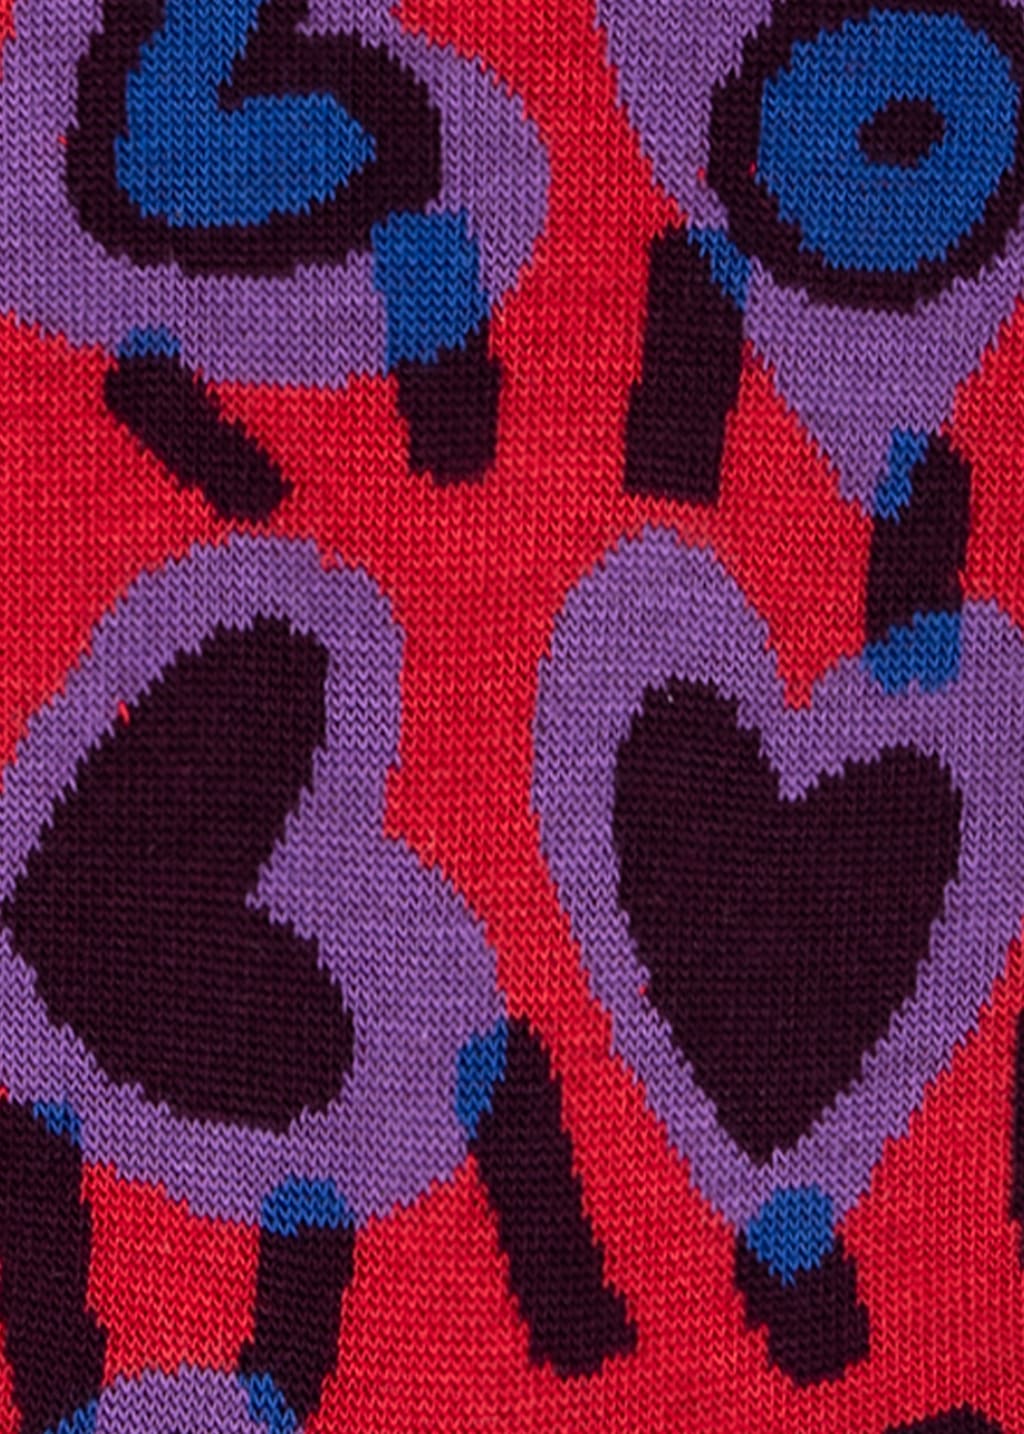 Product View - Women's Red 'Valentines' Socks by Paul Smith